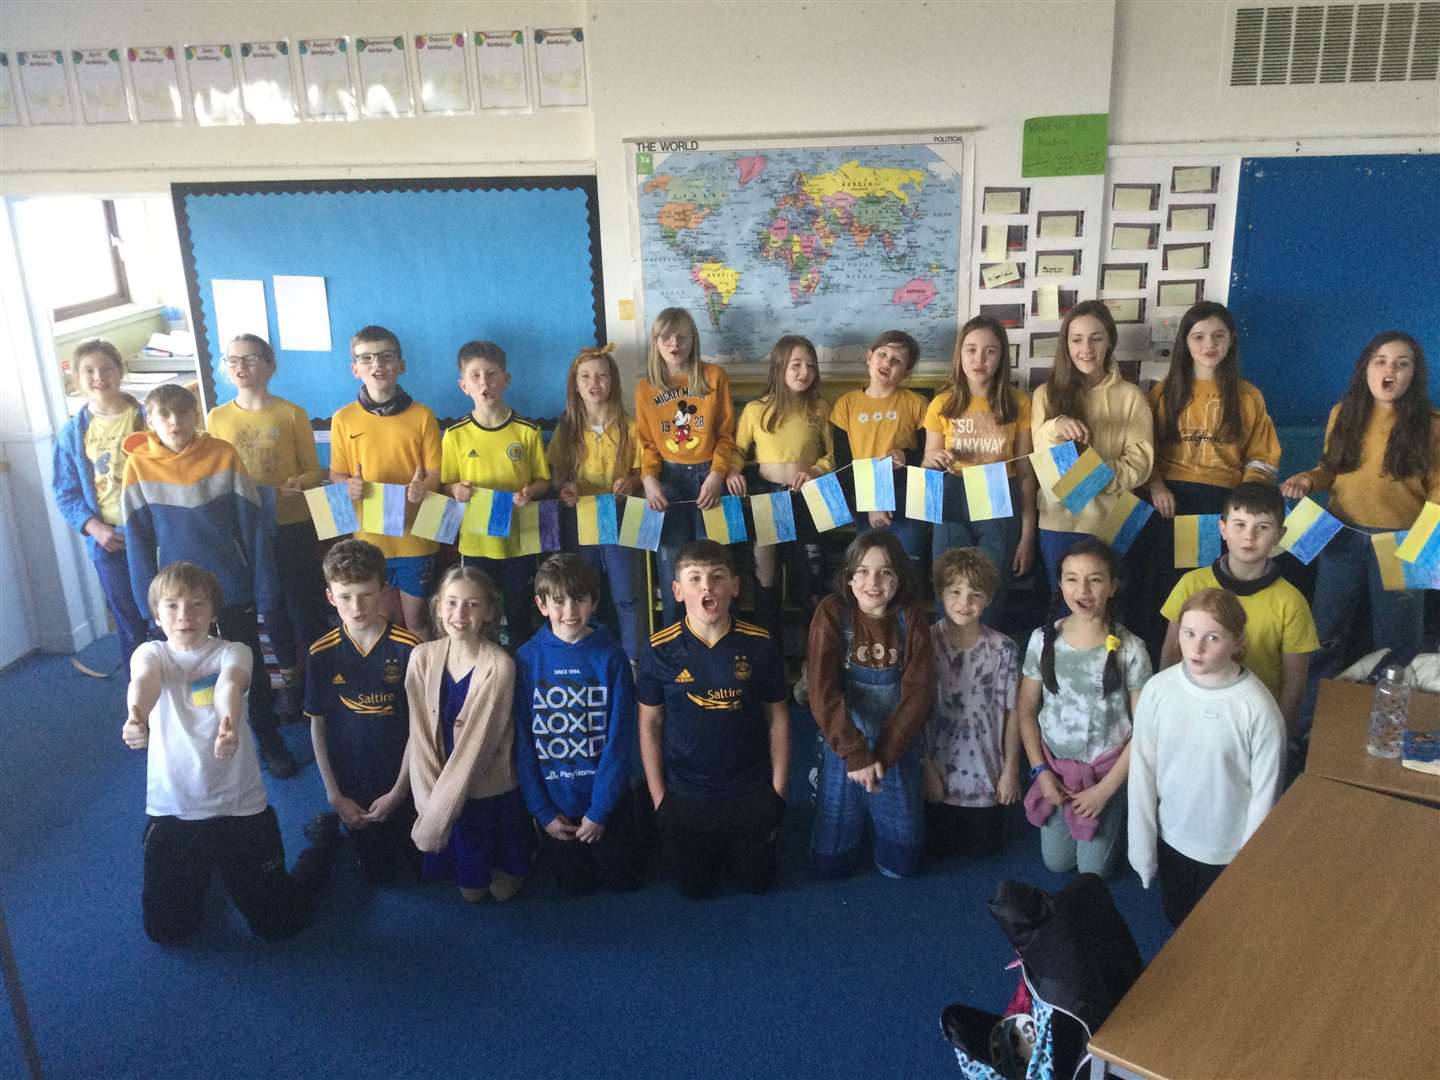 Hopeman Primary's P6 class organised a fundraising day in school by asking all the children and staff to wear blue and yellow to school and make a contribution to help raise money for Ukrainian refugees.